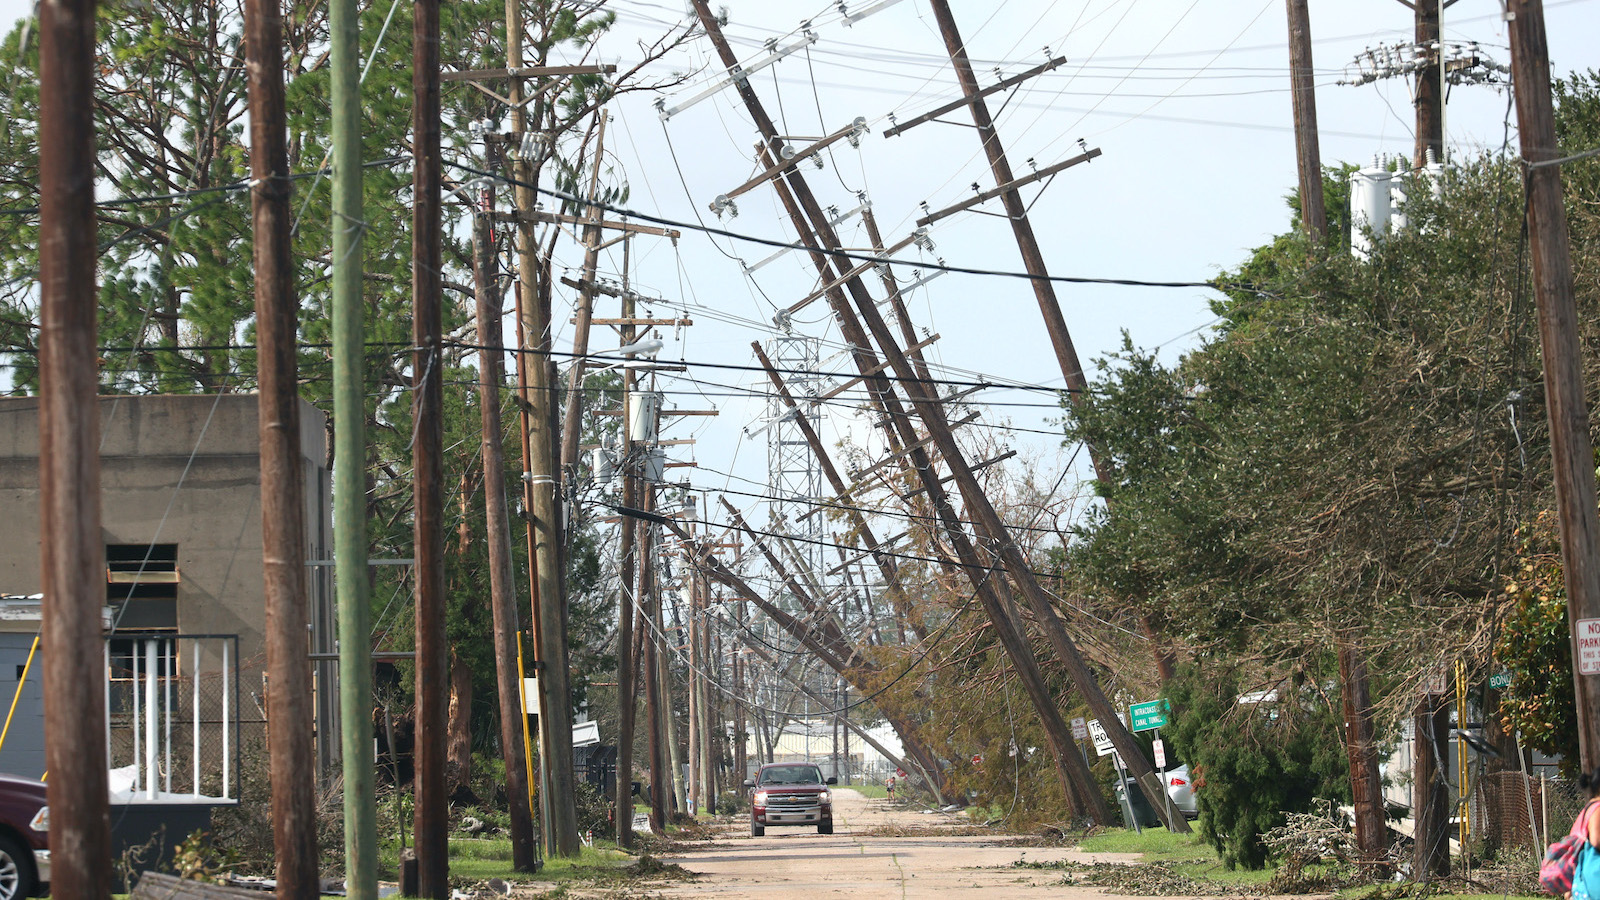 Downed power lines on a road in Houma, Louisiana.